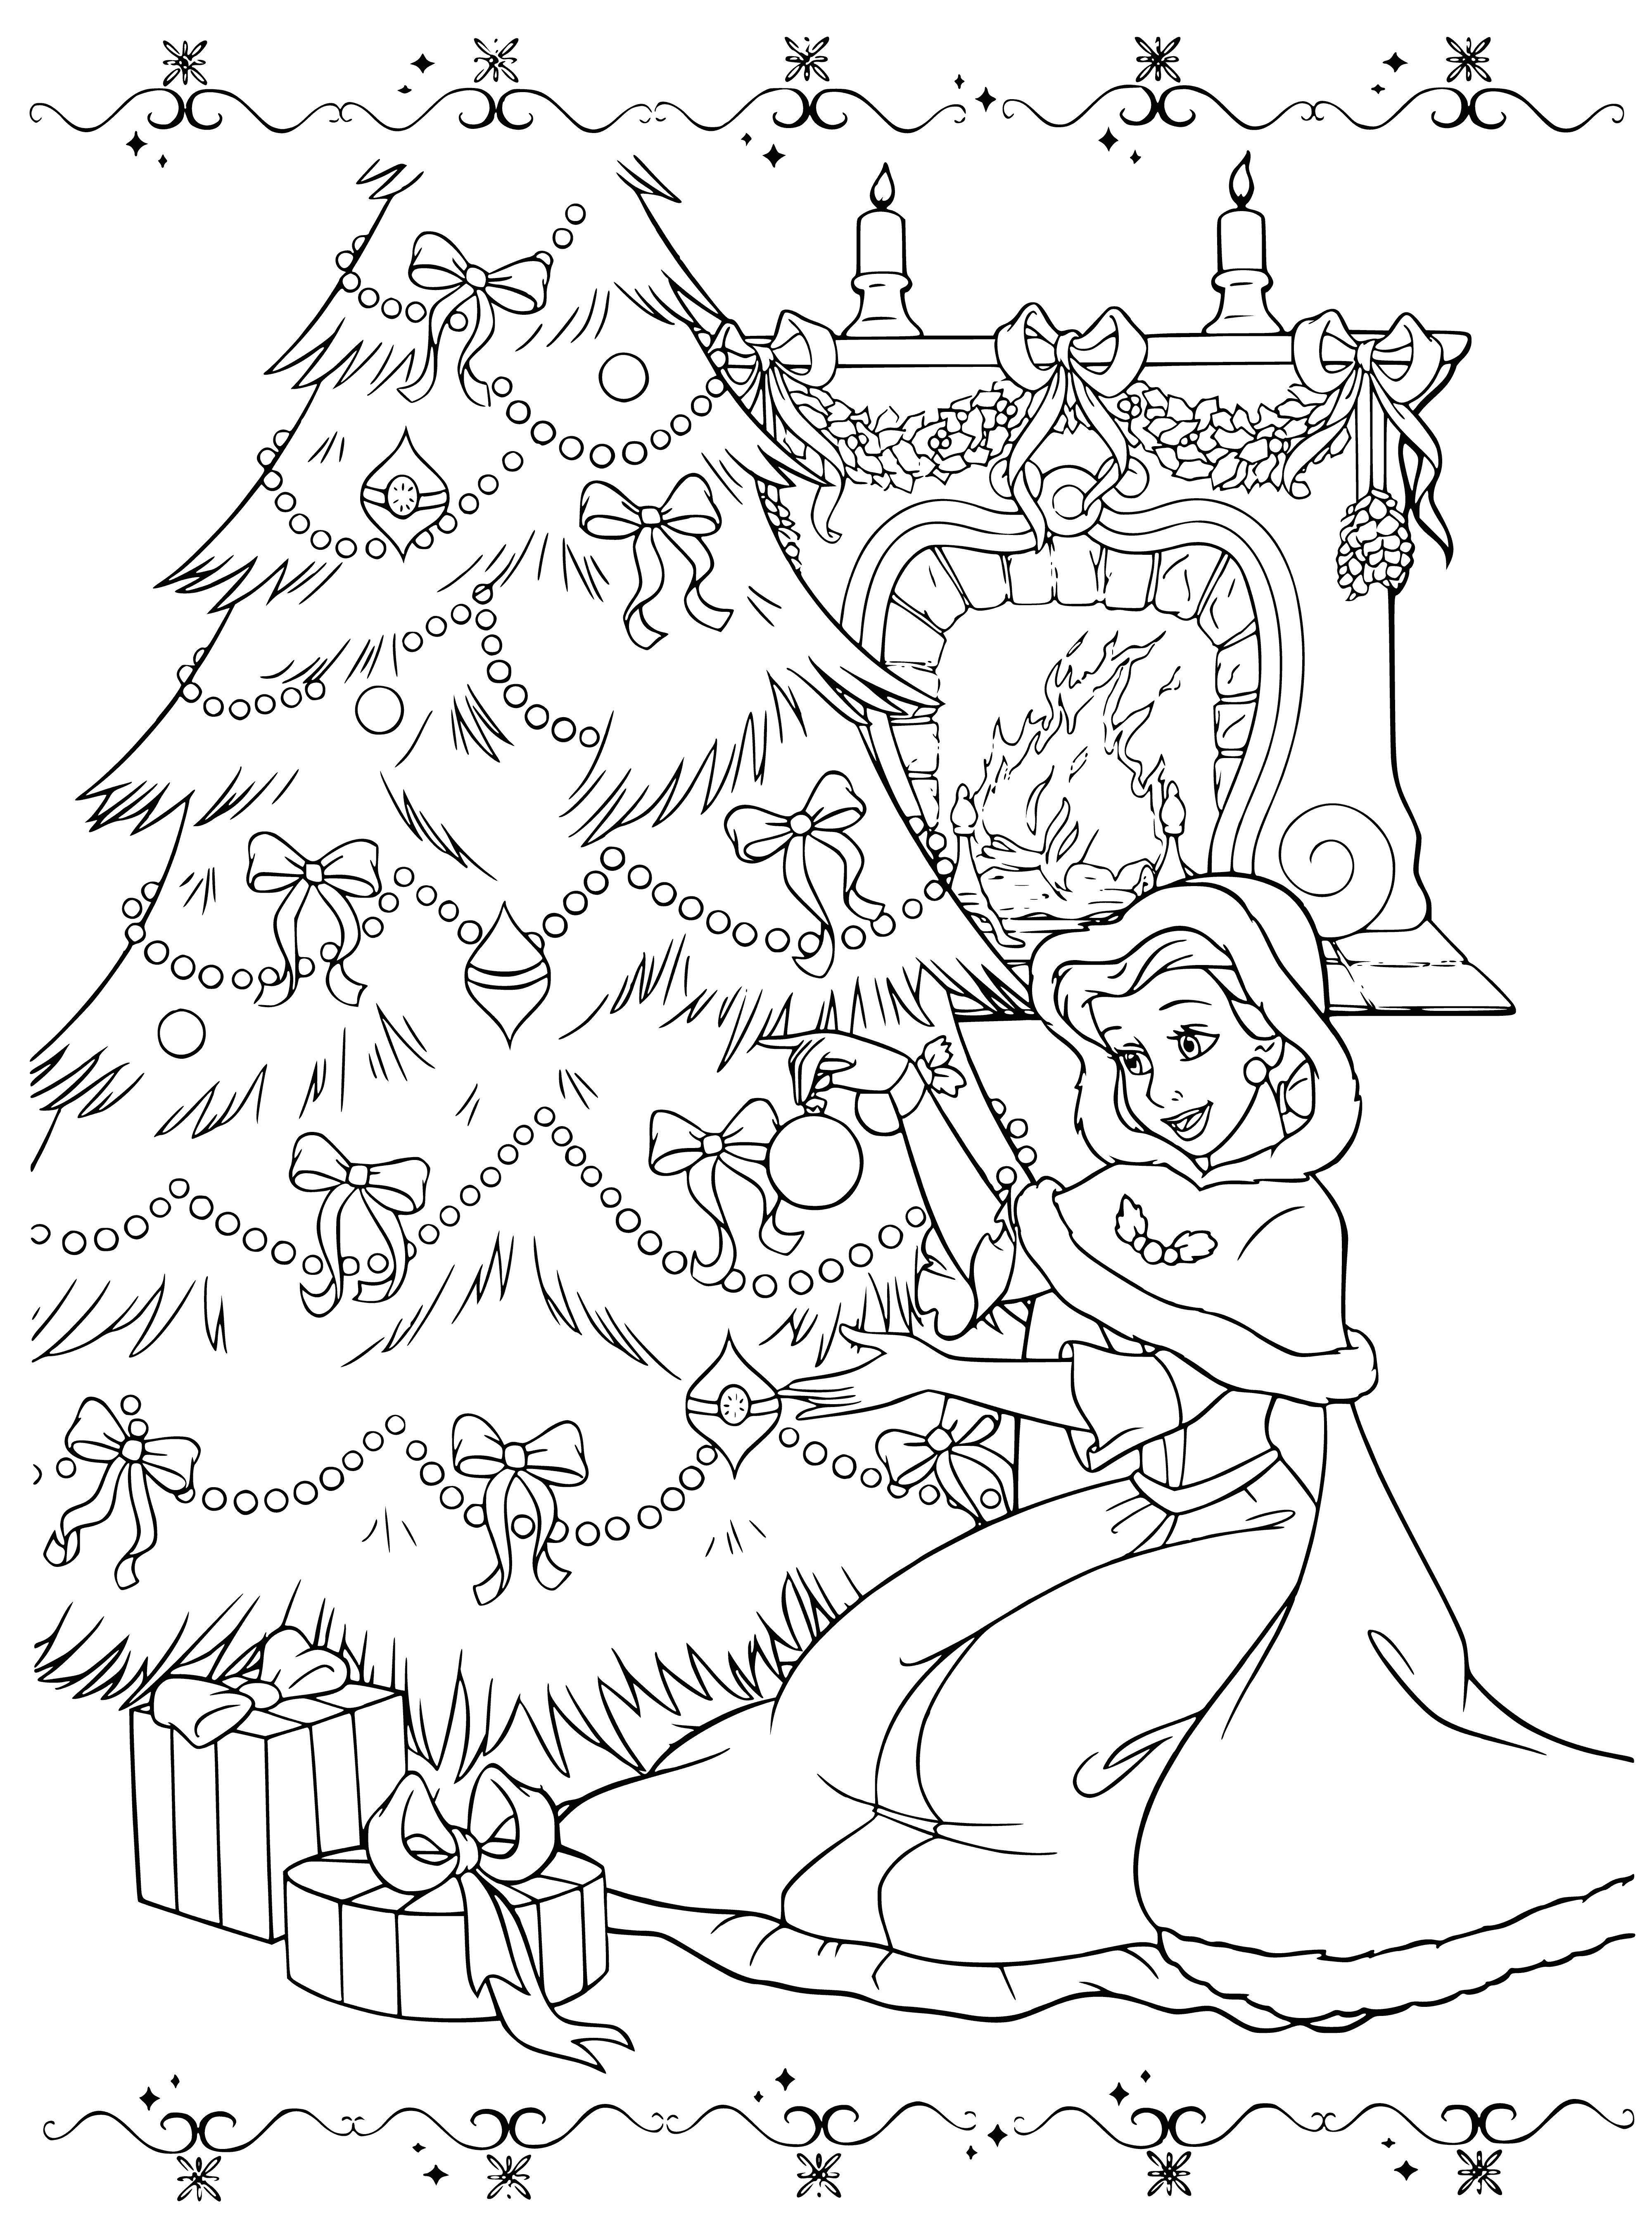 Belle decorates the Christmas tree coloring page